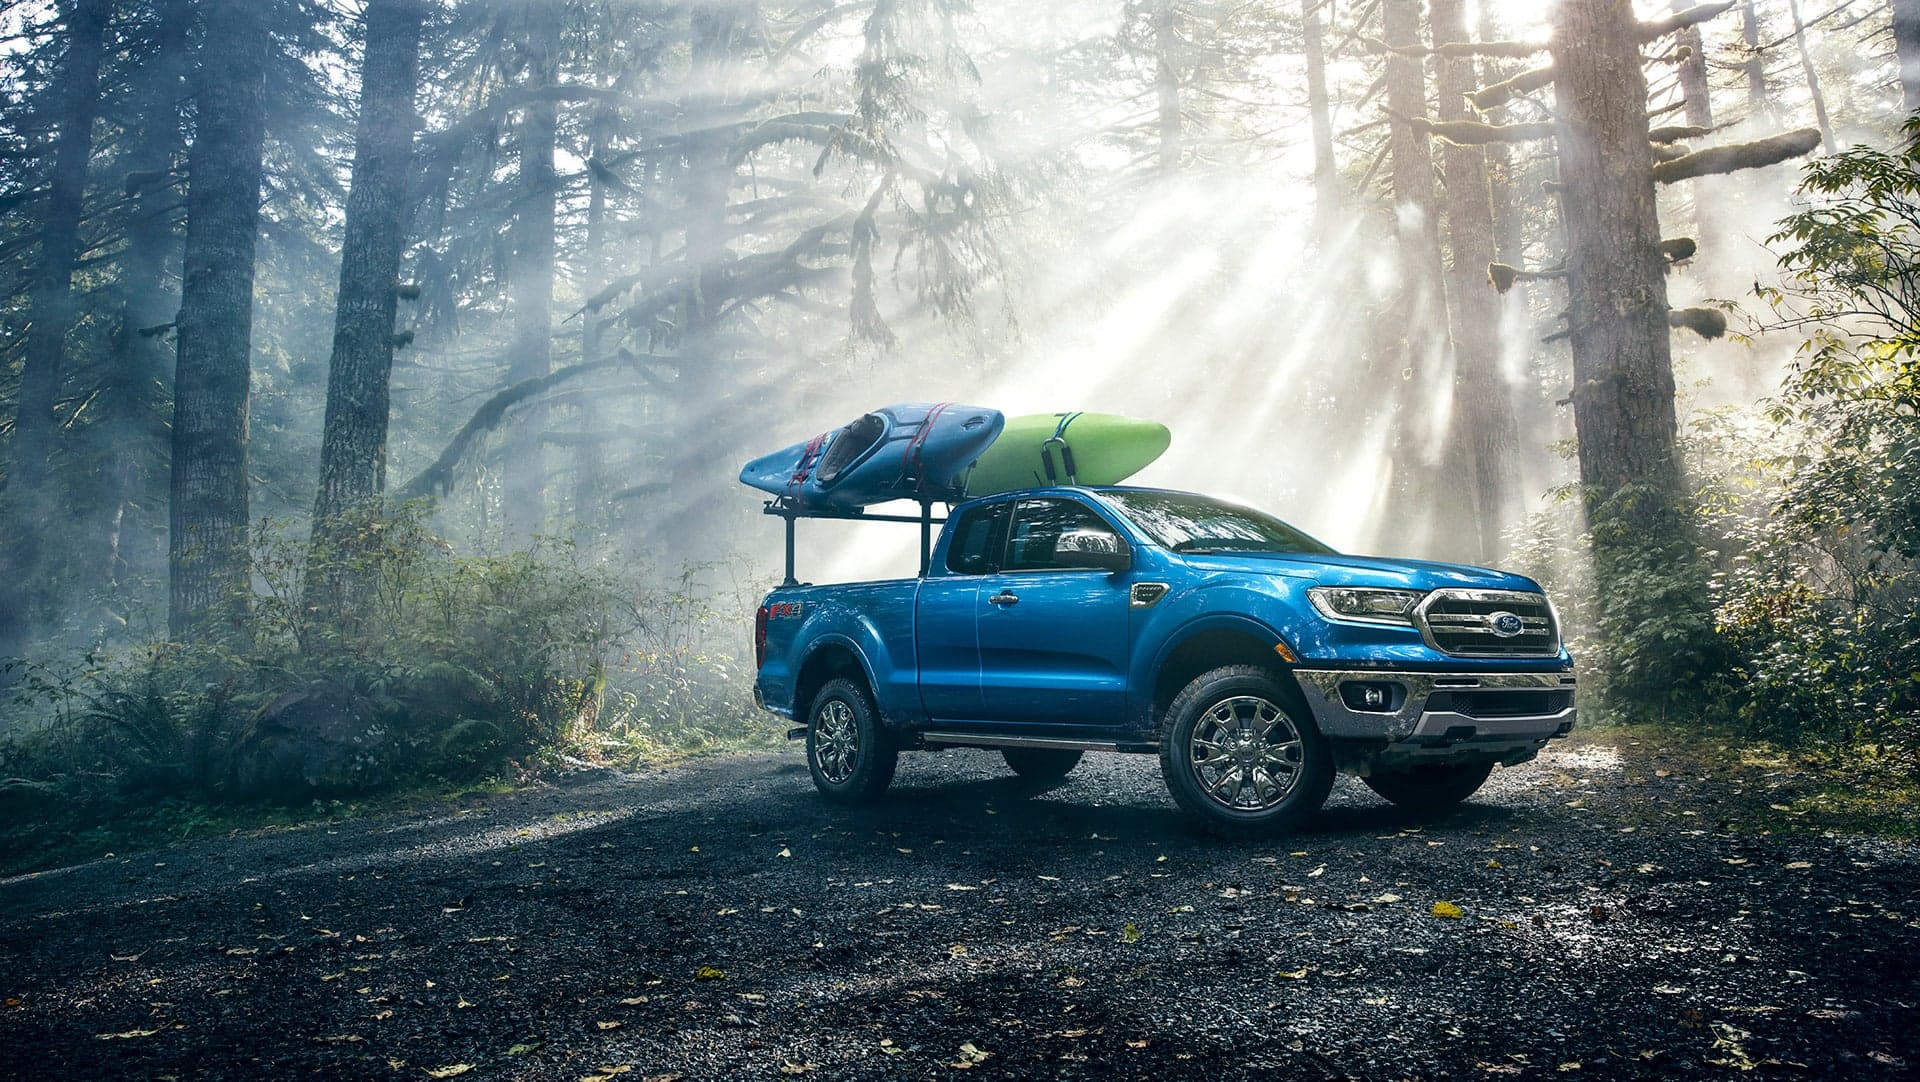 2019 Ford Ranger Power and Towing Specs Revealed